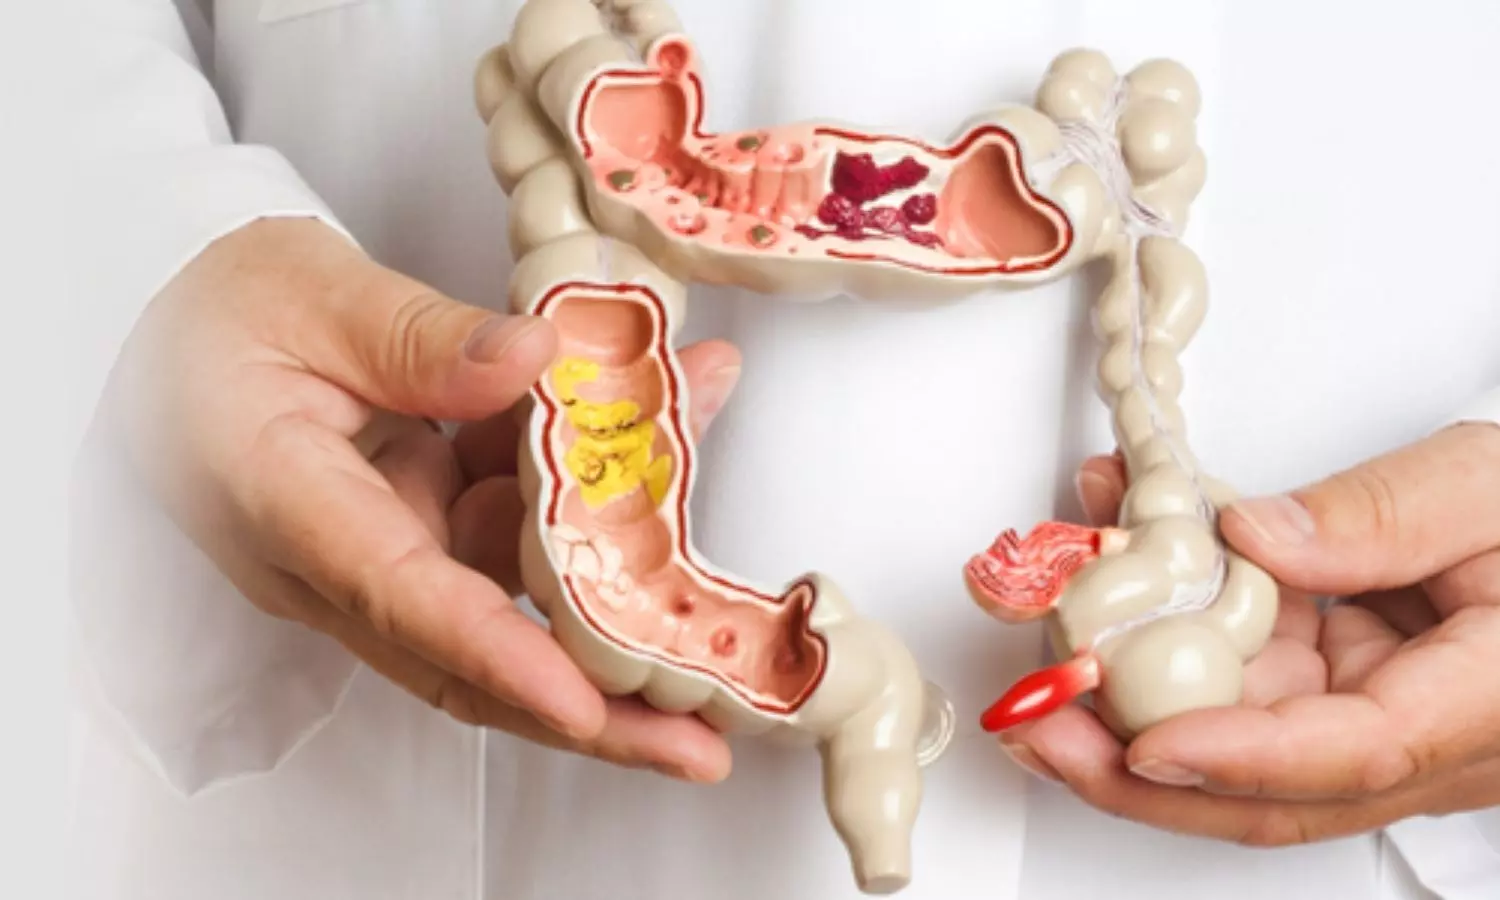 Lifetime obesity shows increased impact in Colorectal Cancer risk: JAMA